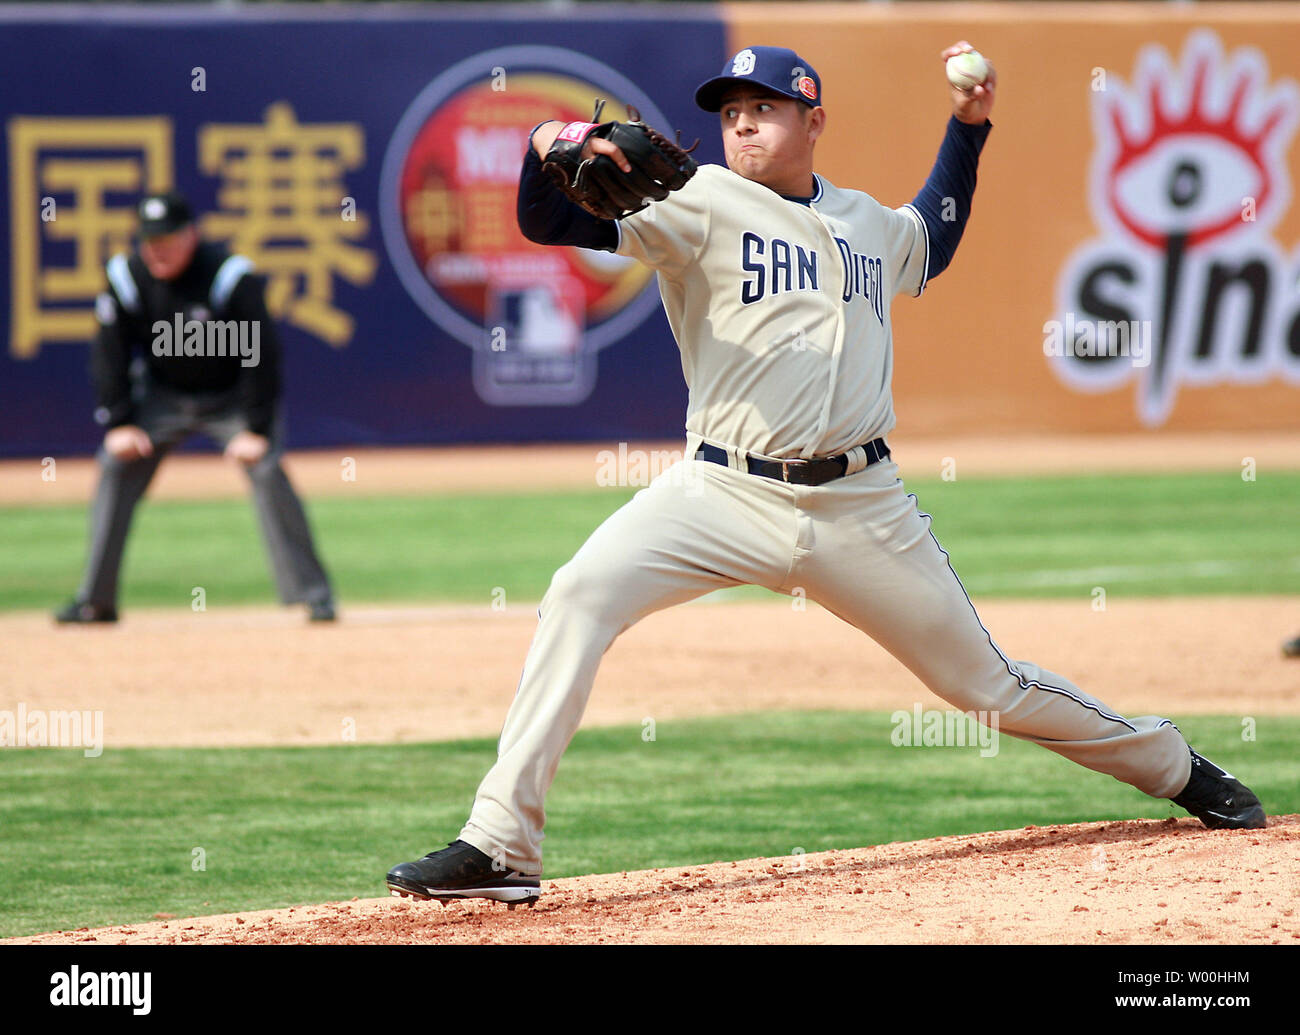 MLB apparel by Koreas FF finds favor in China  KED Global